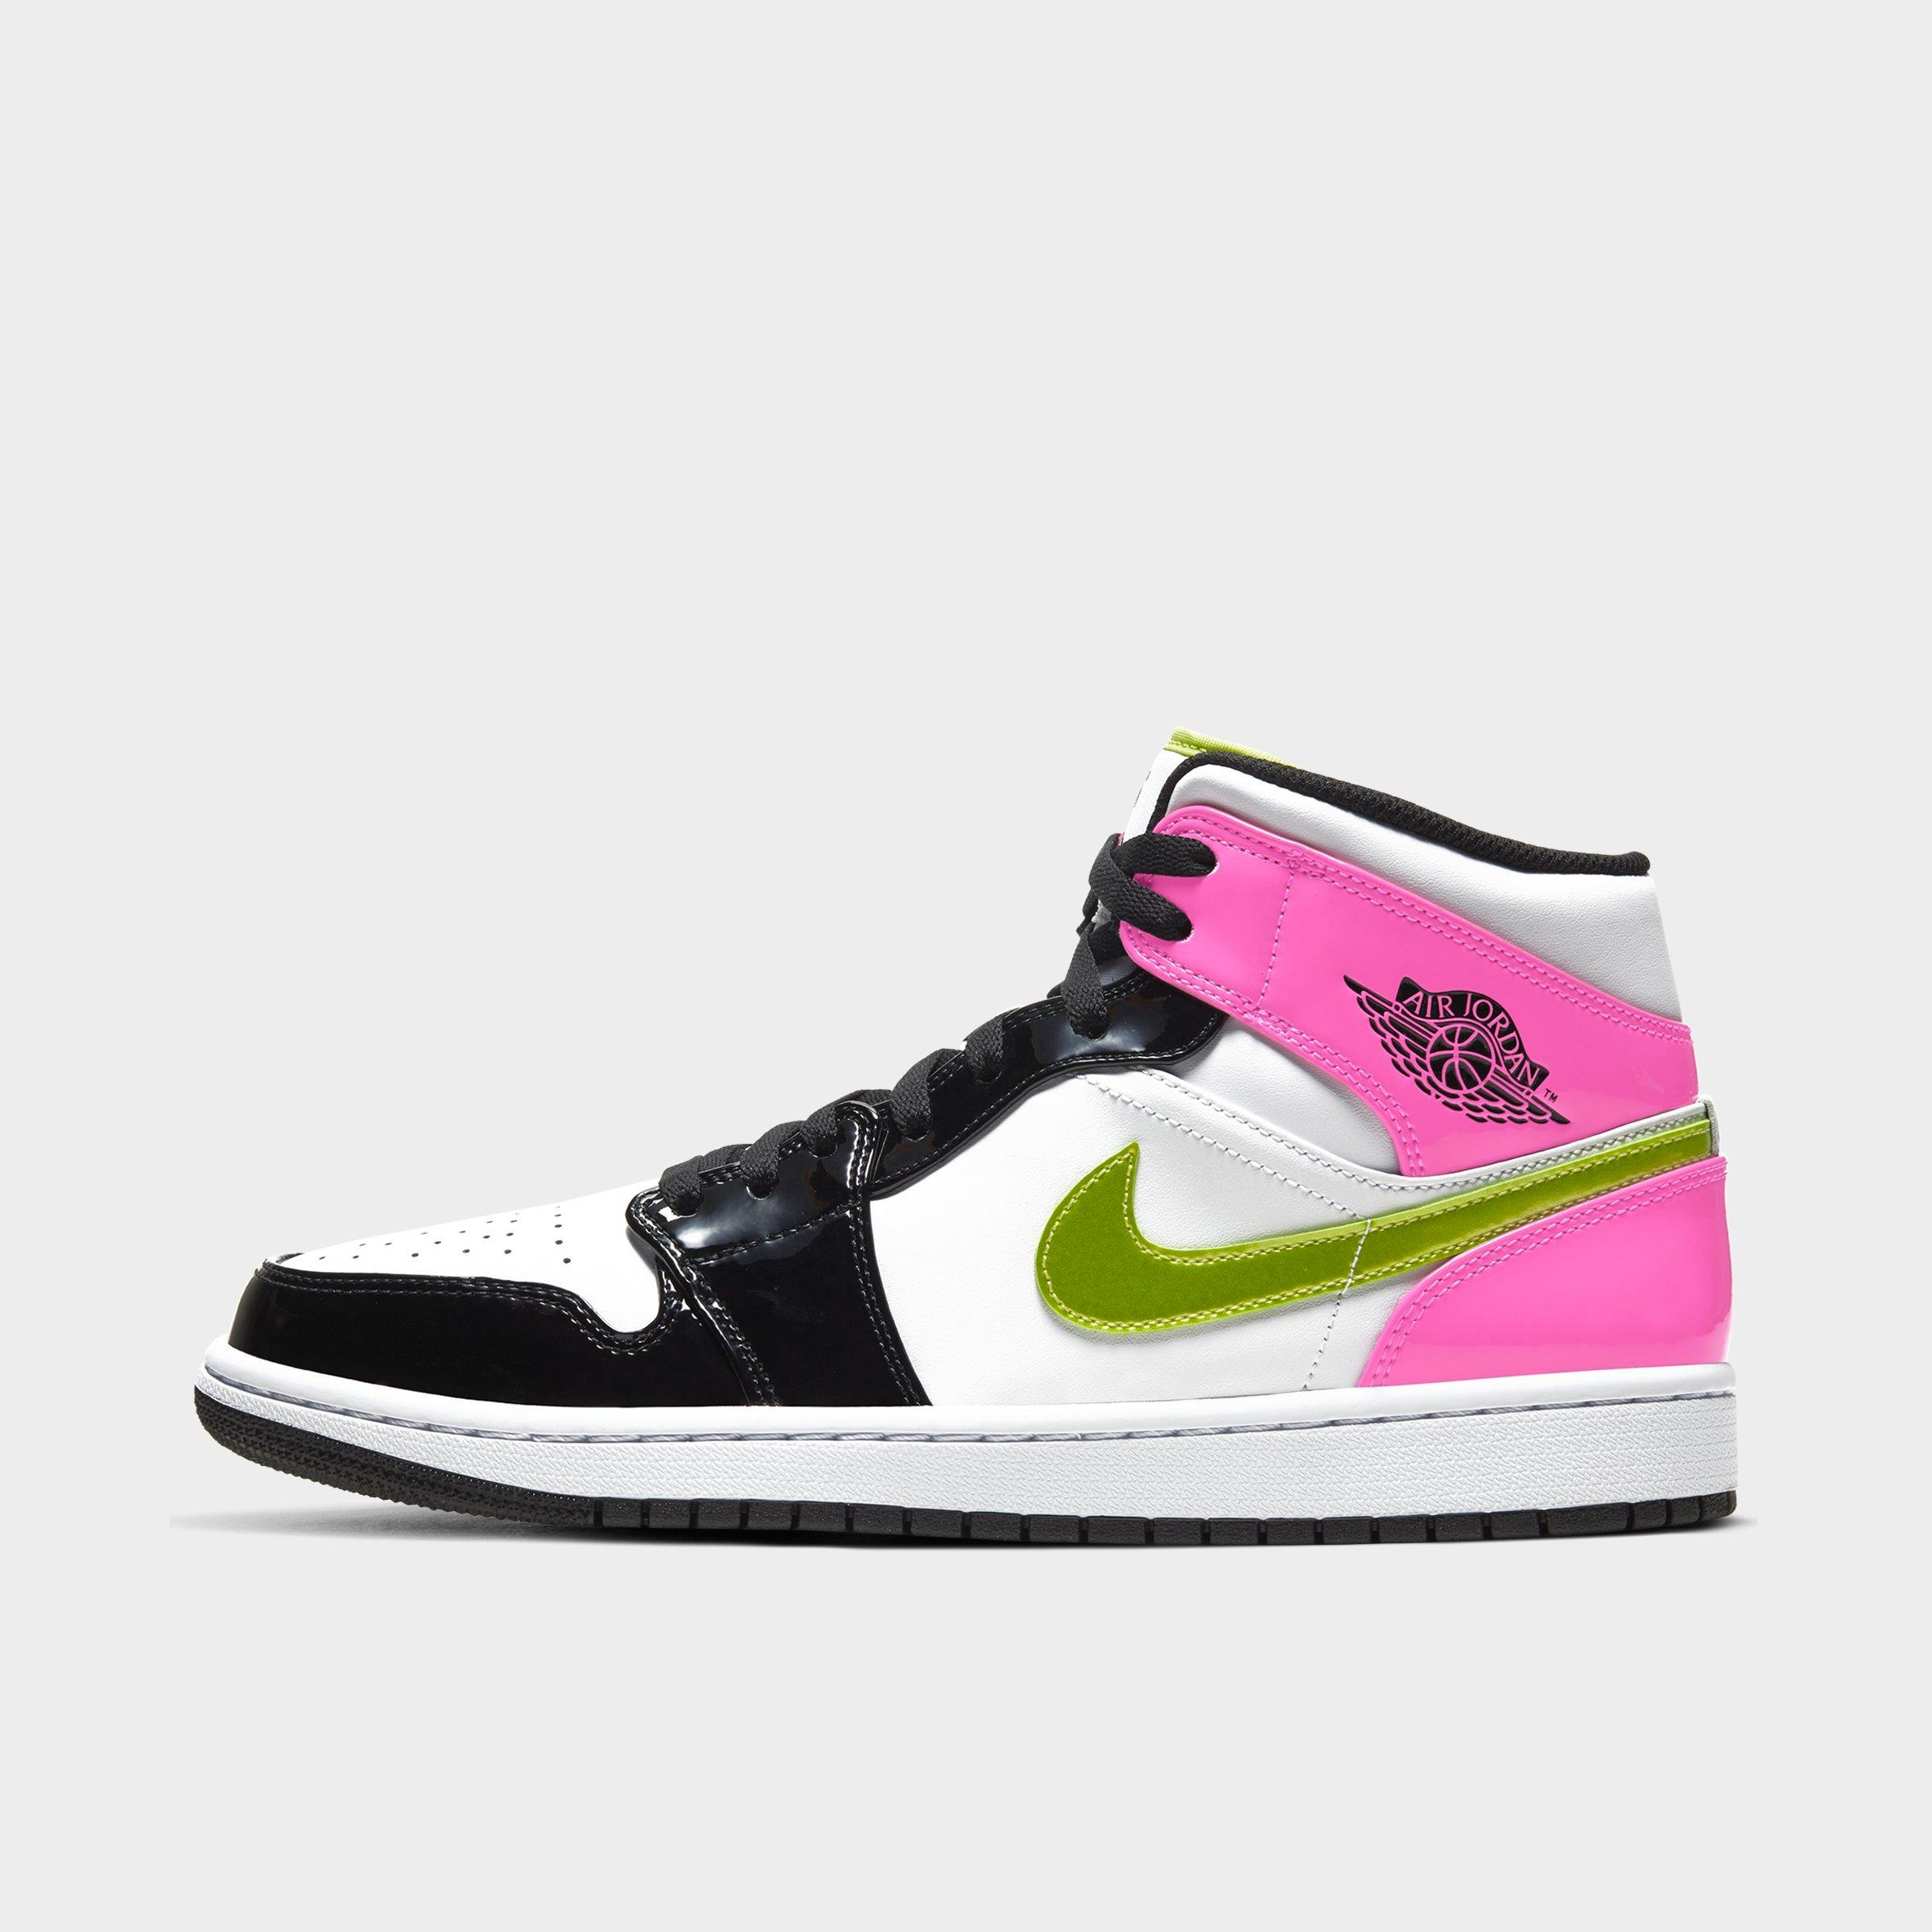 aj1 mid sneakers mens lifestyle shoes 